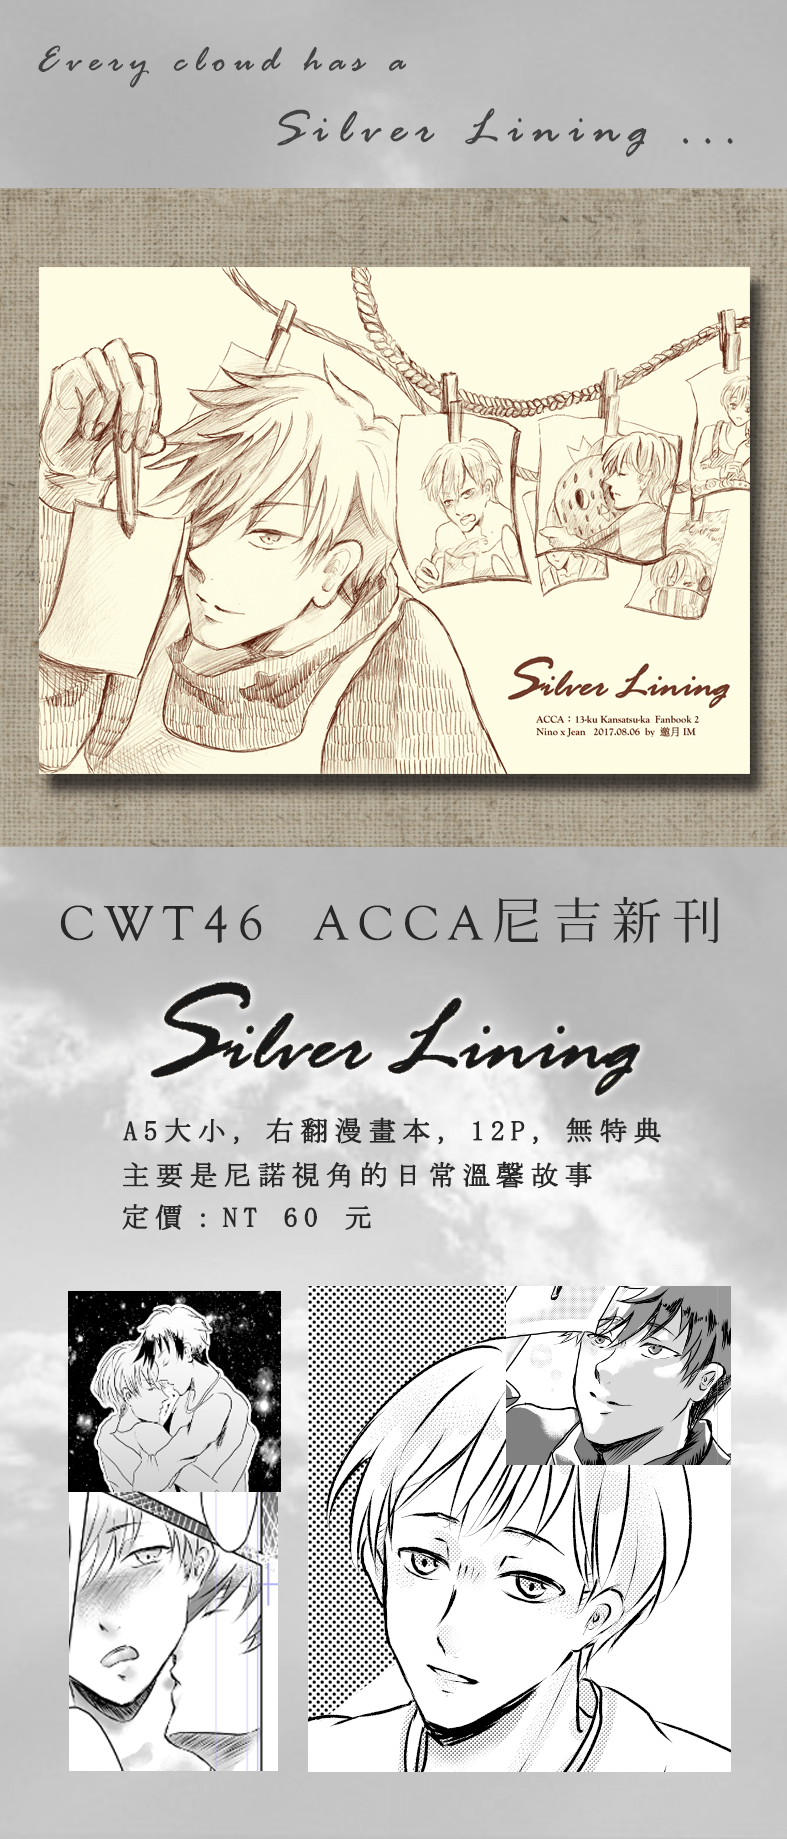 Silver Lining 試閱圖